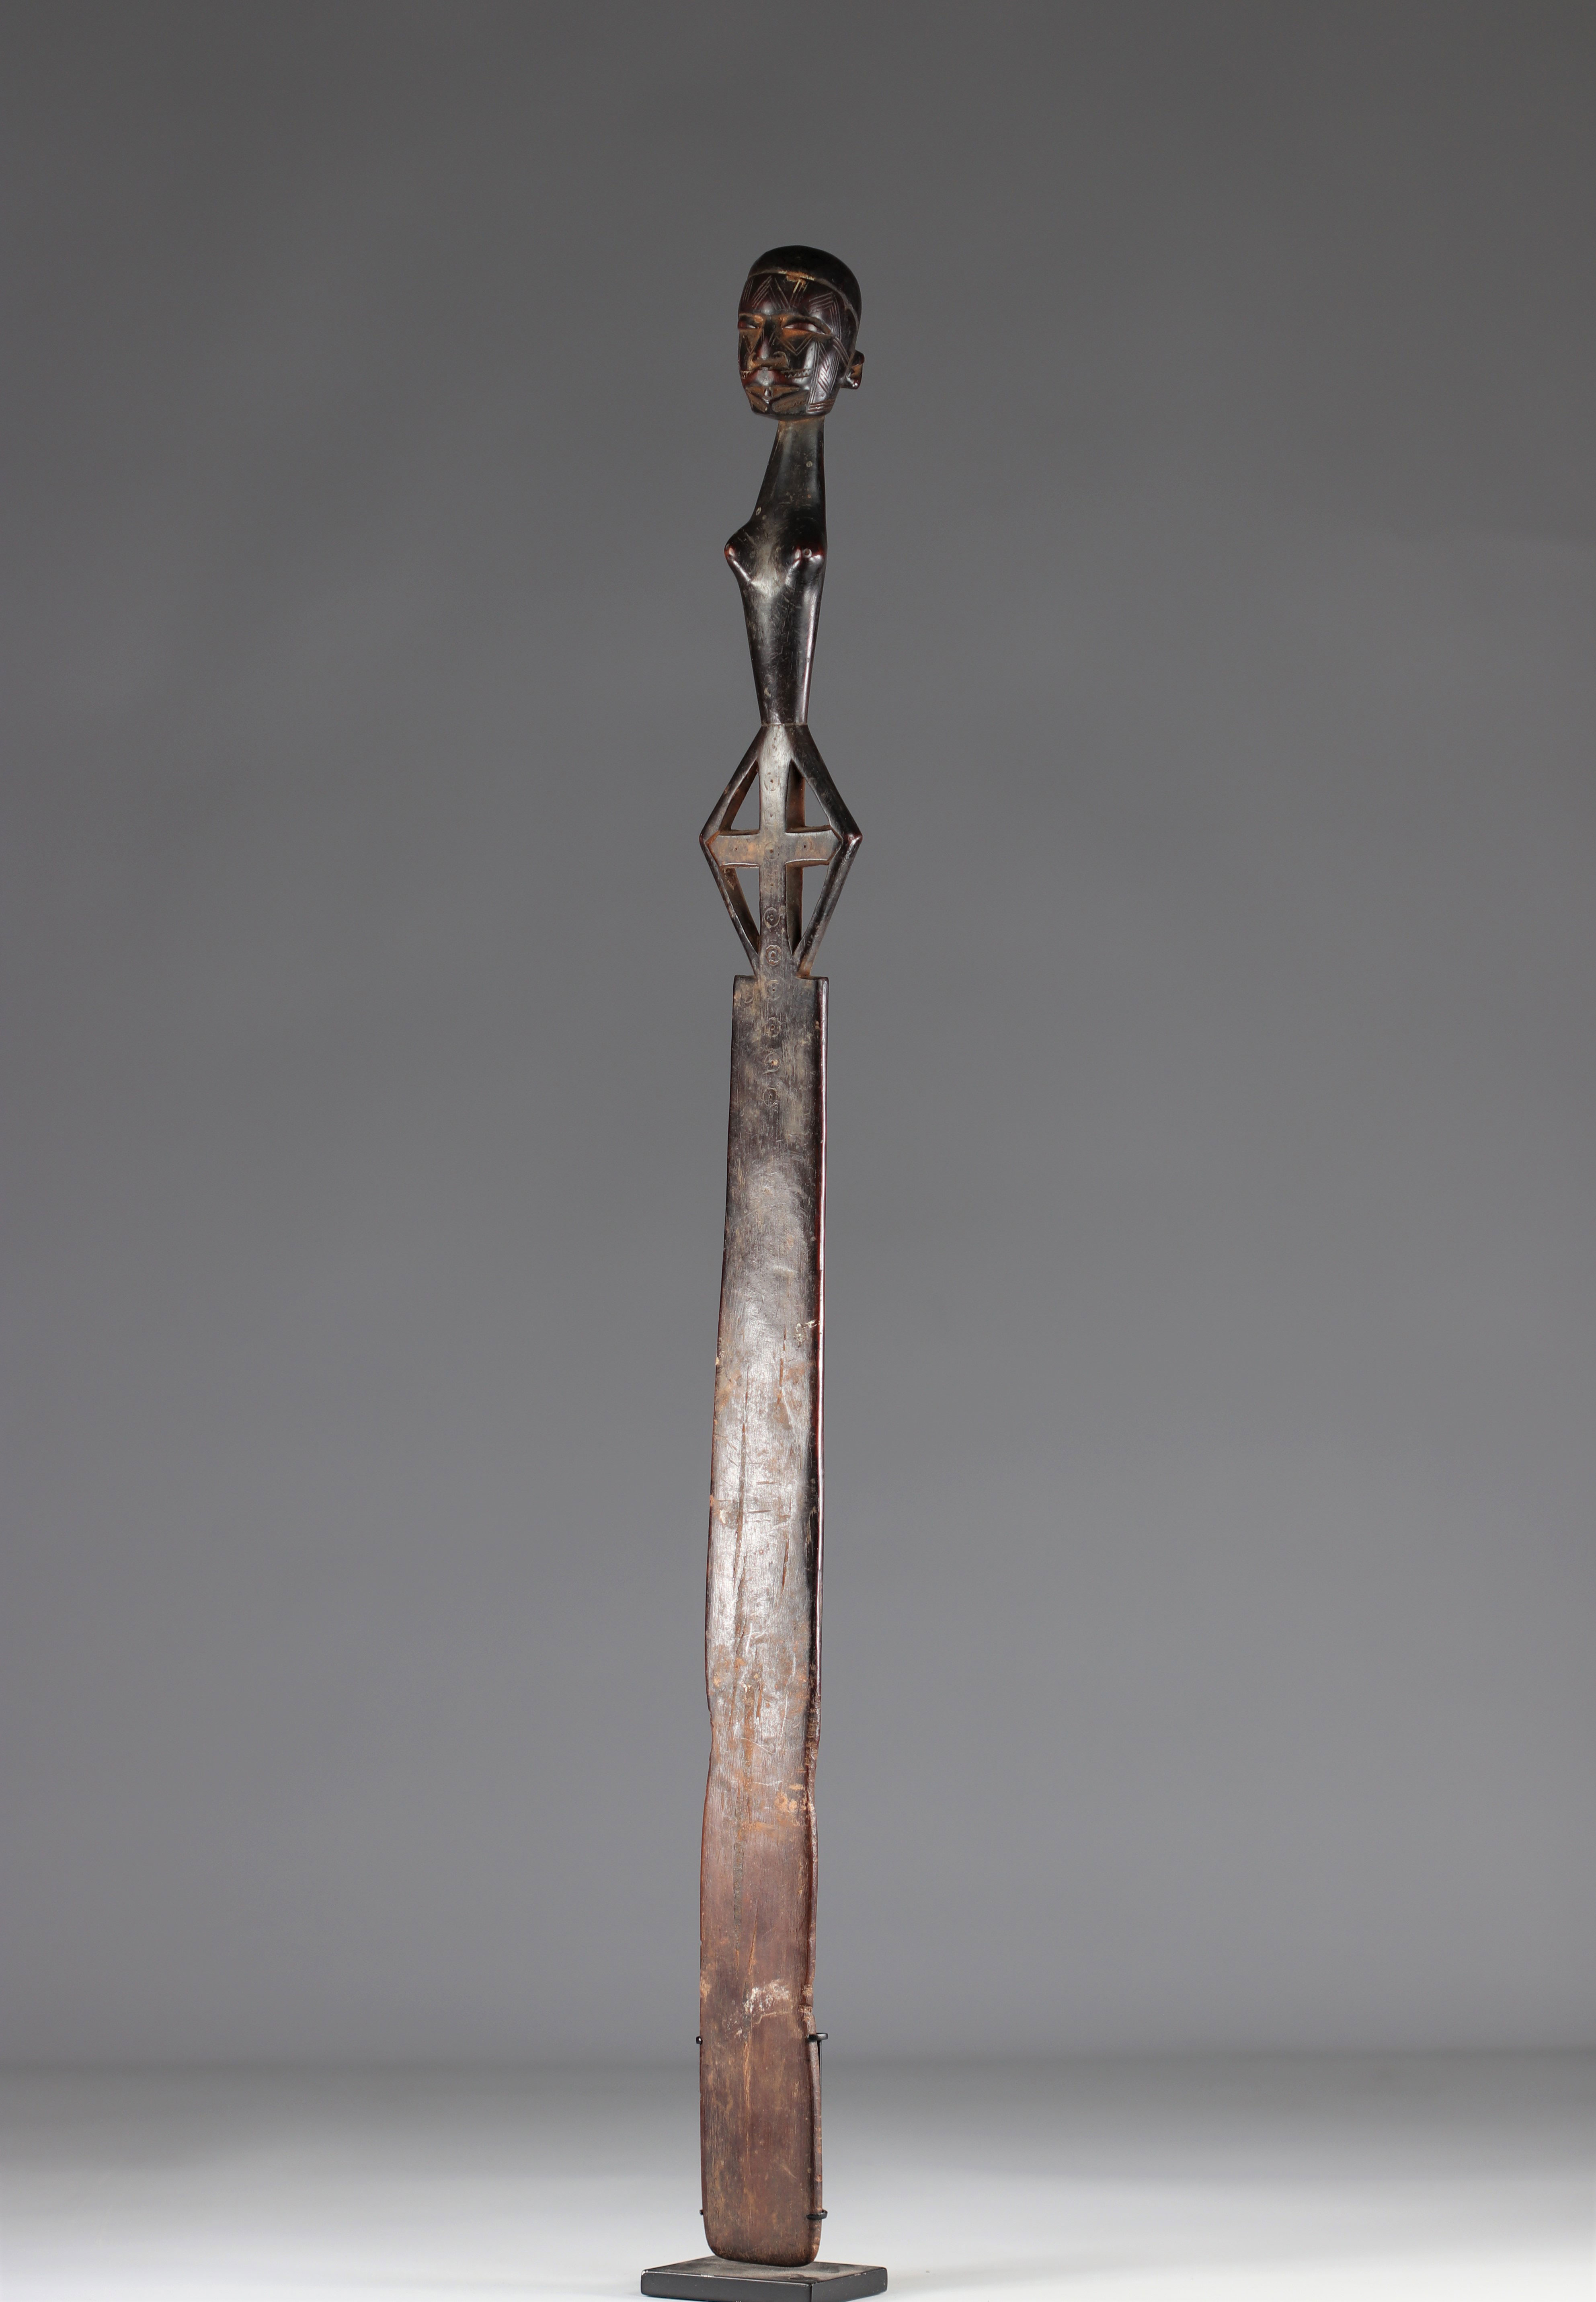 Scepter of dignitary Makonde 20th century - private collection Belgium- Tanzania - Africa - Image 3 of 6